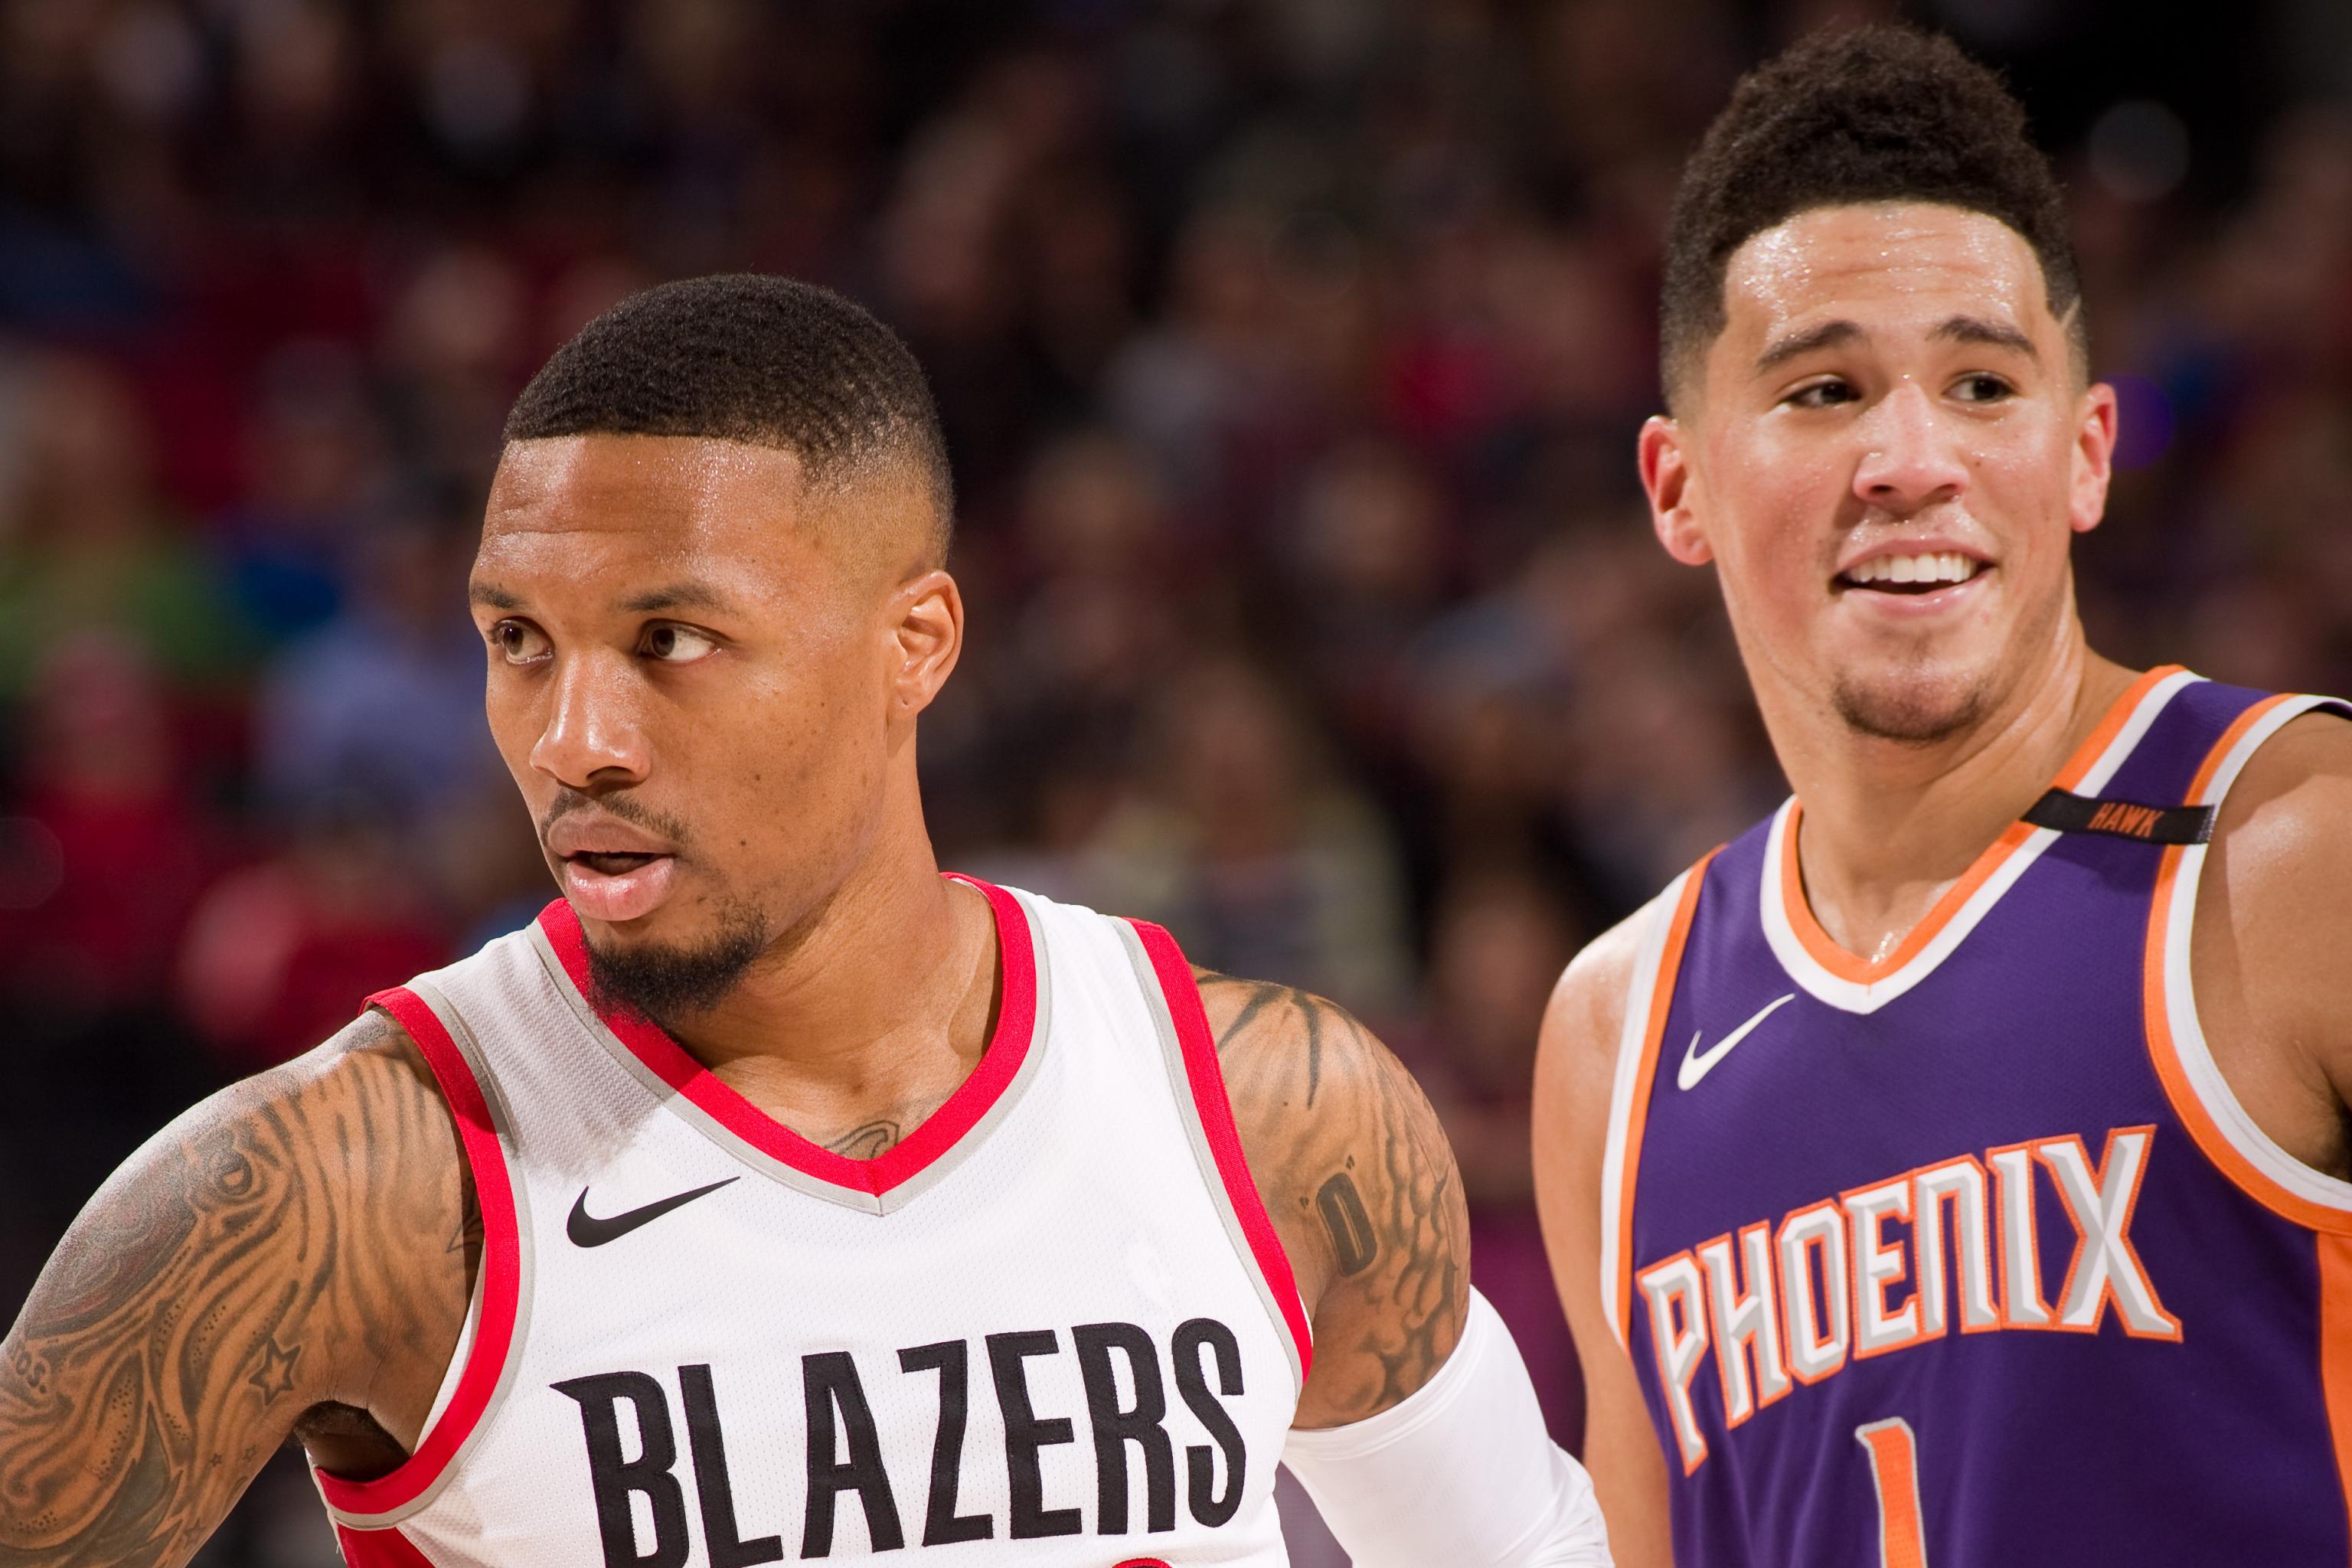 Devin Booker Replaces Injured Damian Lillard in All-Star Game, 3